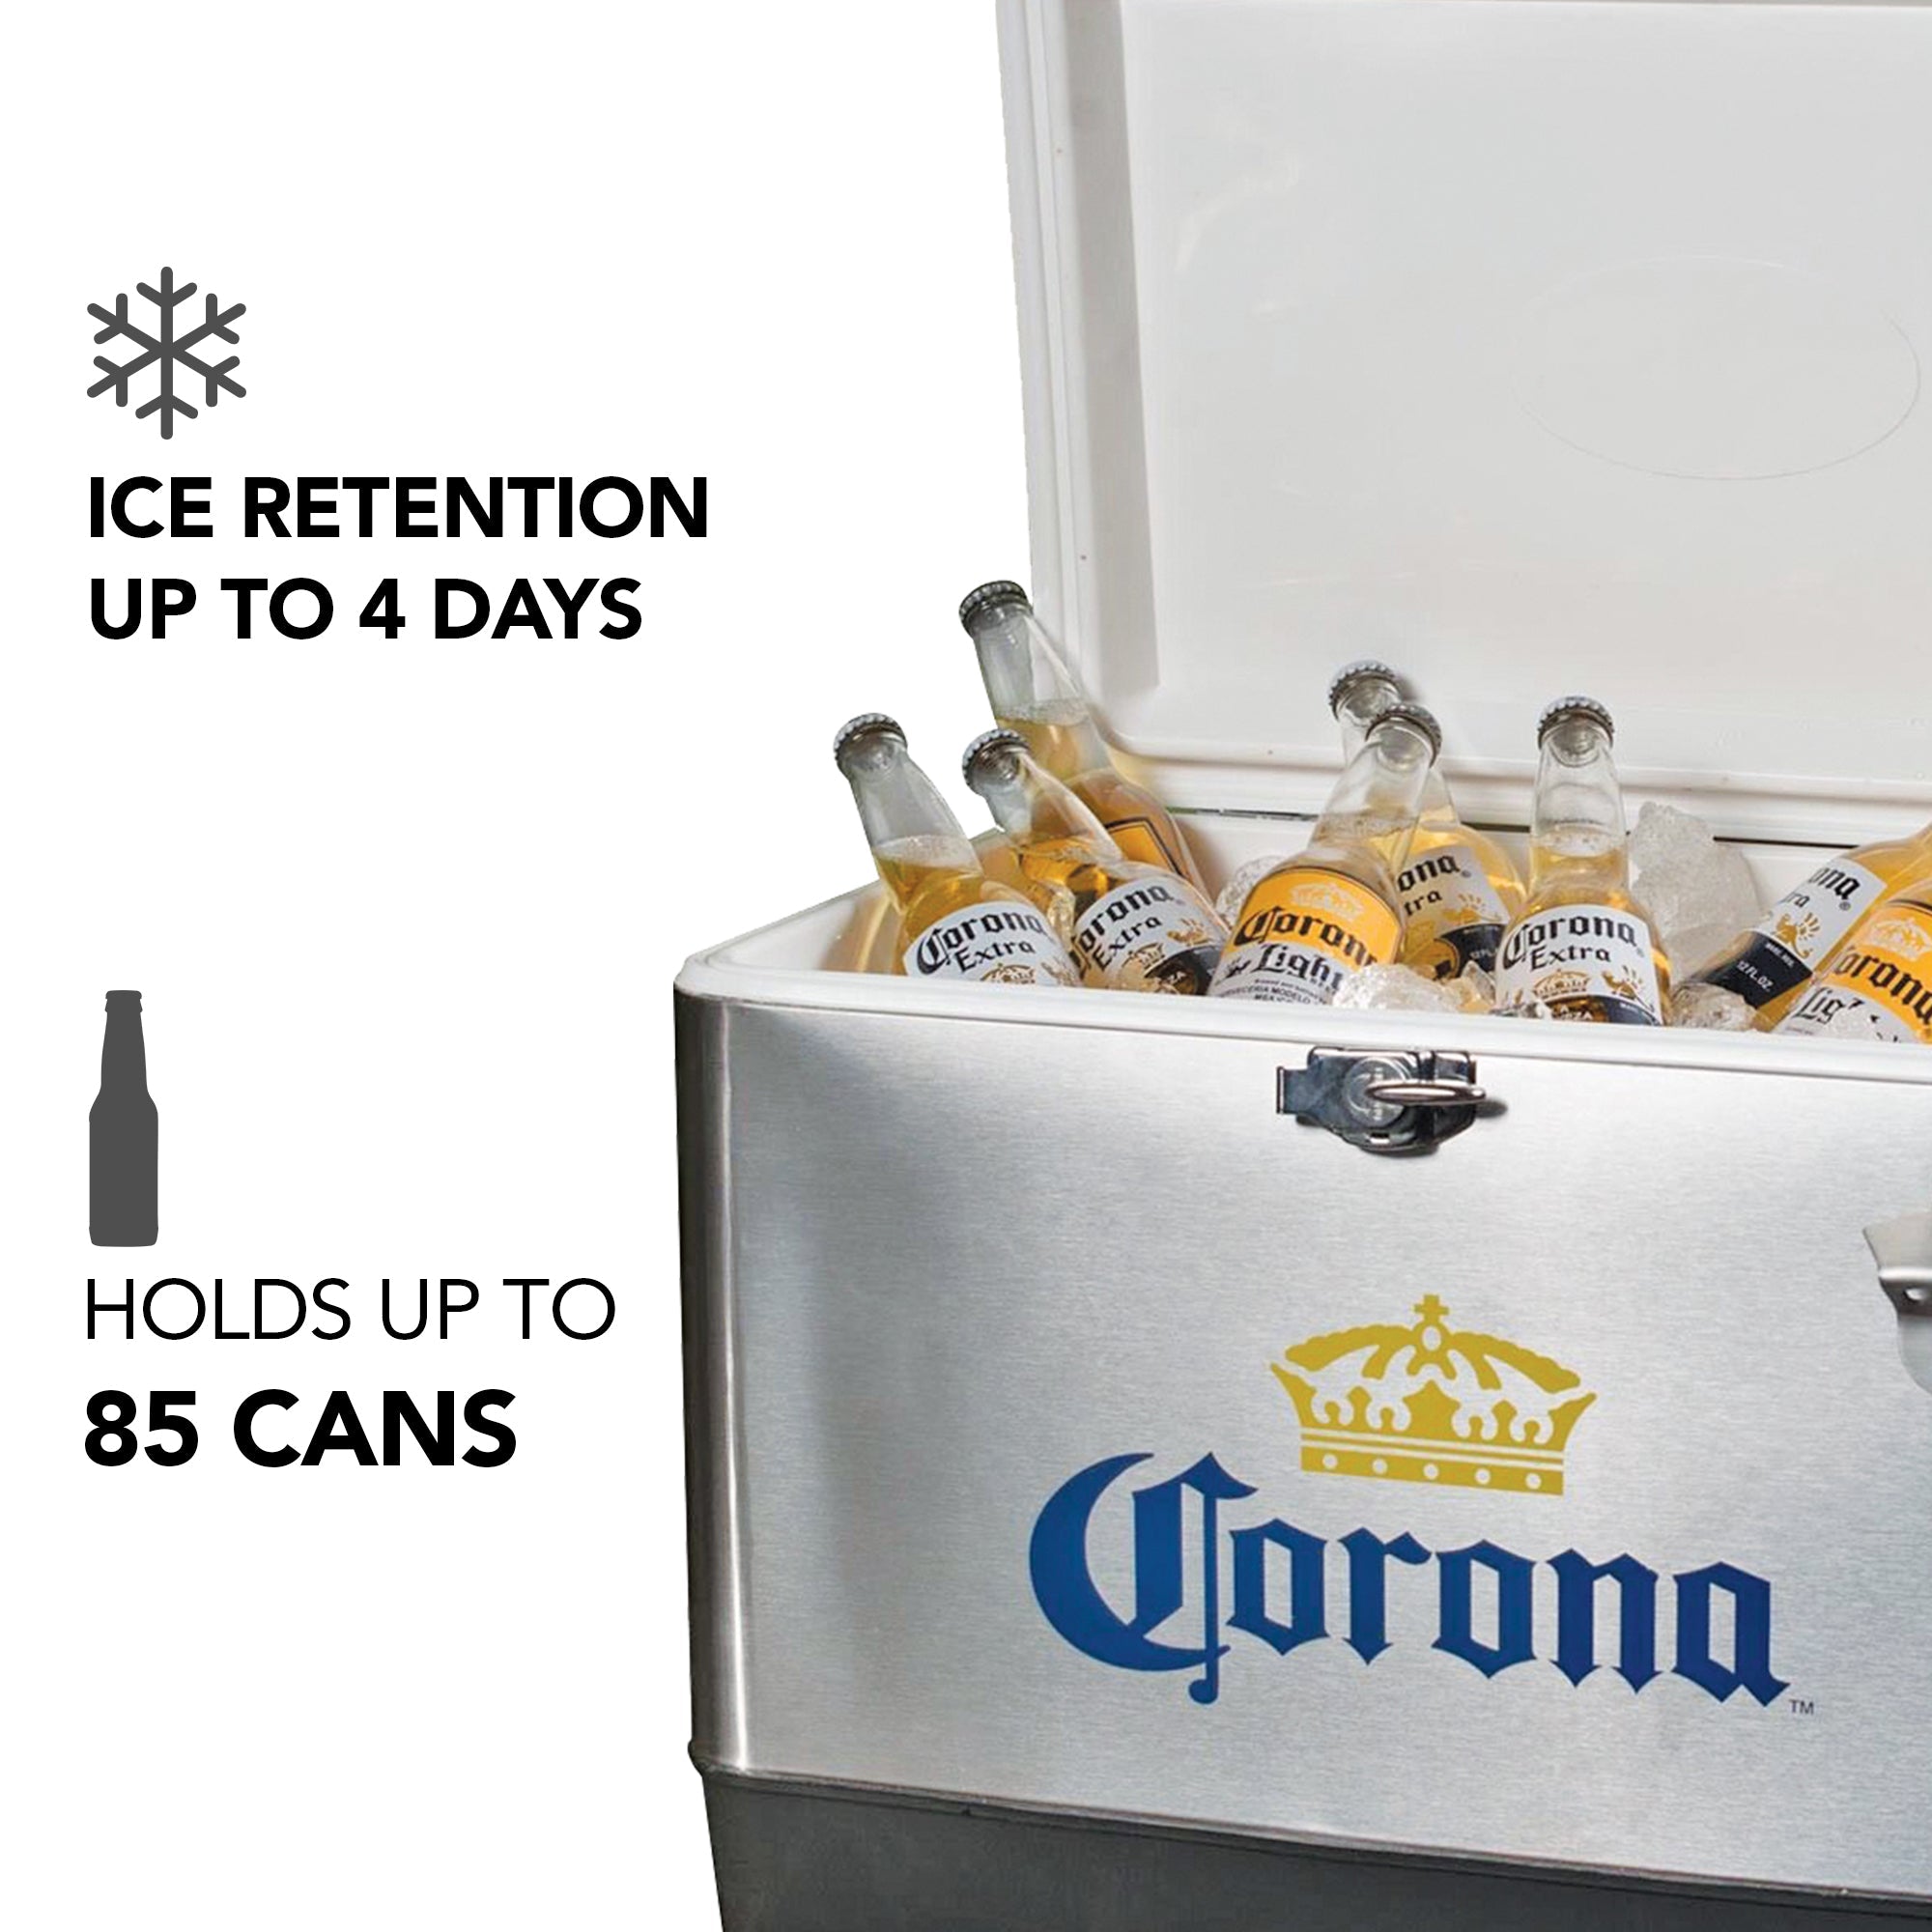 Product shot of Corona 51 L ice chest, open with ice and bottles of Corona beer inside, on a white background. Text and icons to the left describe: Ice retention up to 4 days; holds up to 85 cans